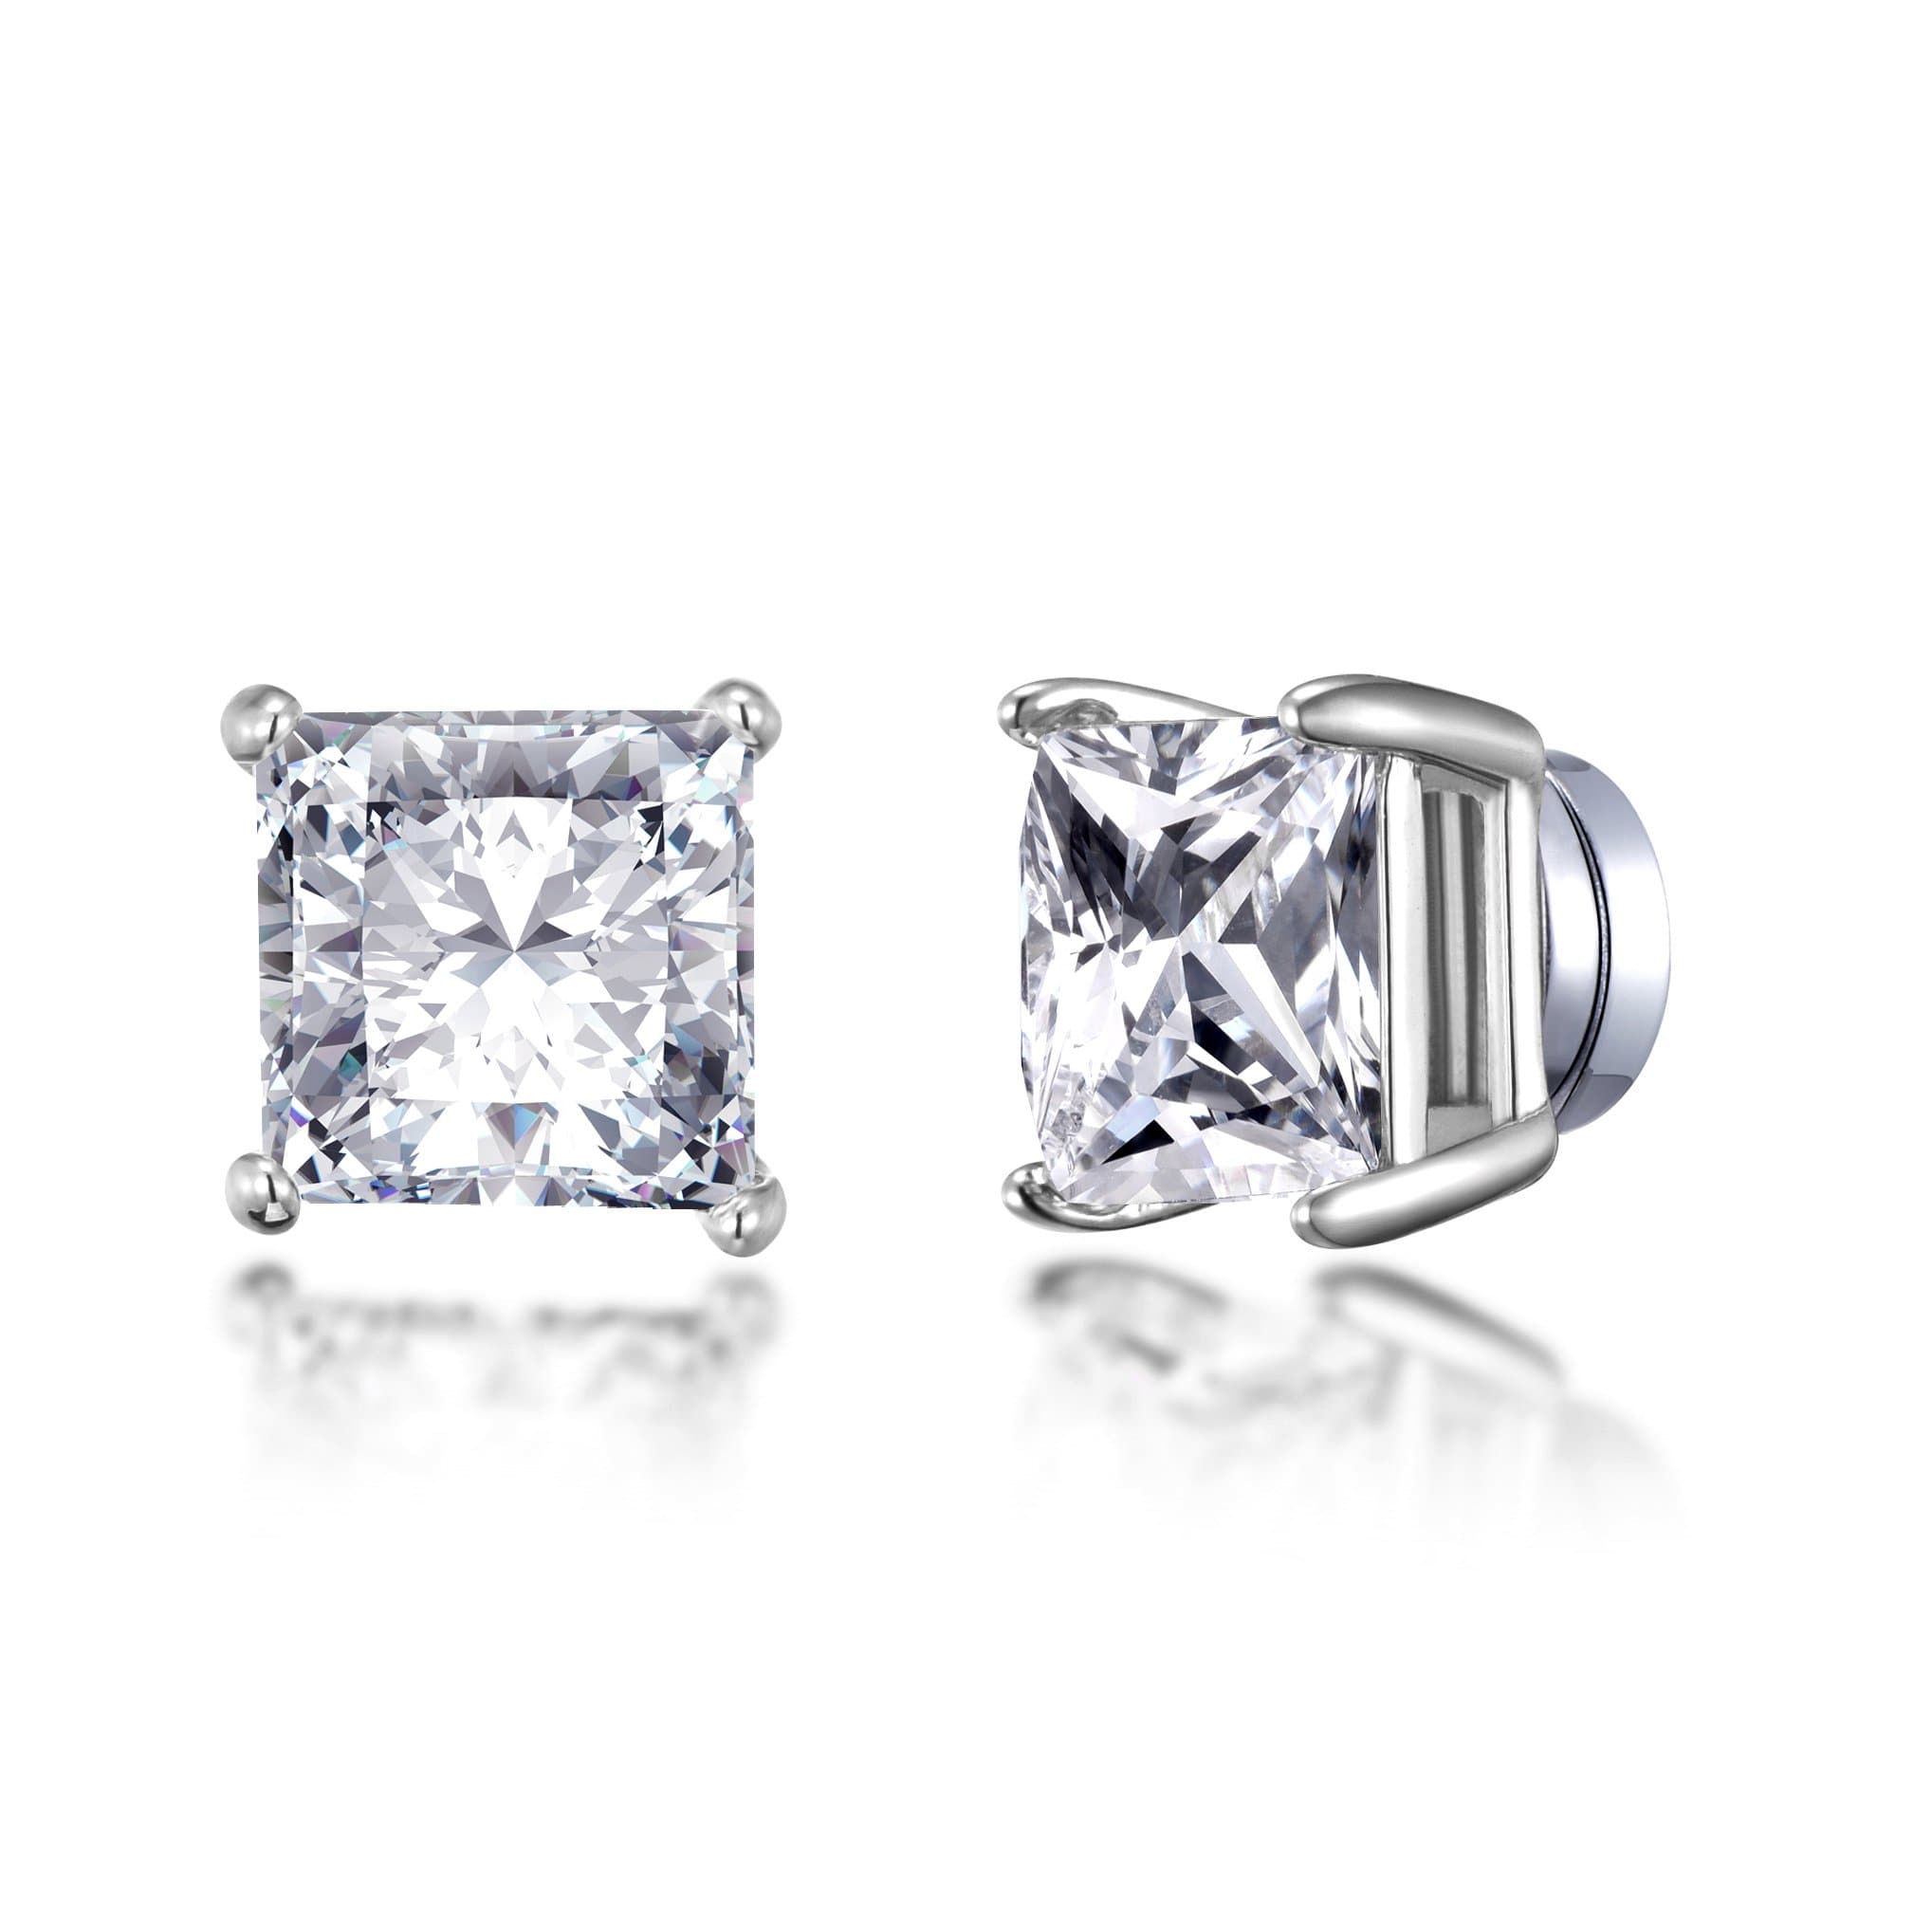 Silver Plated Square Magnetic Clip On Stud Earrings Created with Zircondia® Crystals by Philip Jones Jewellery